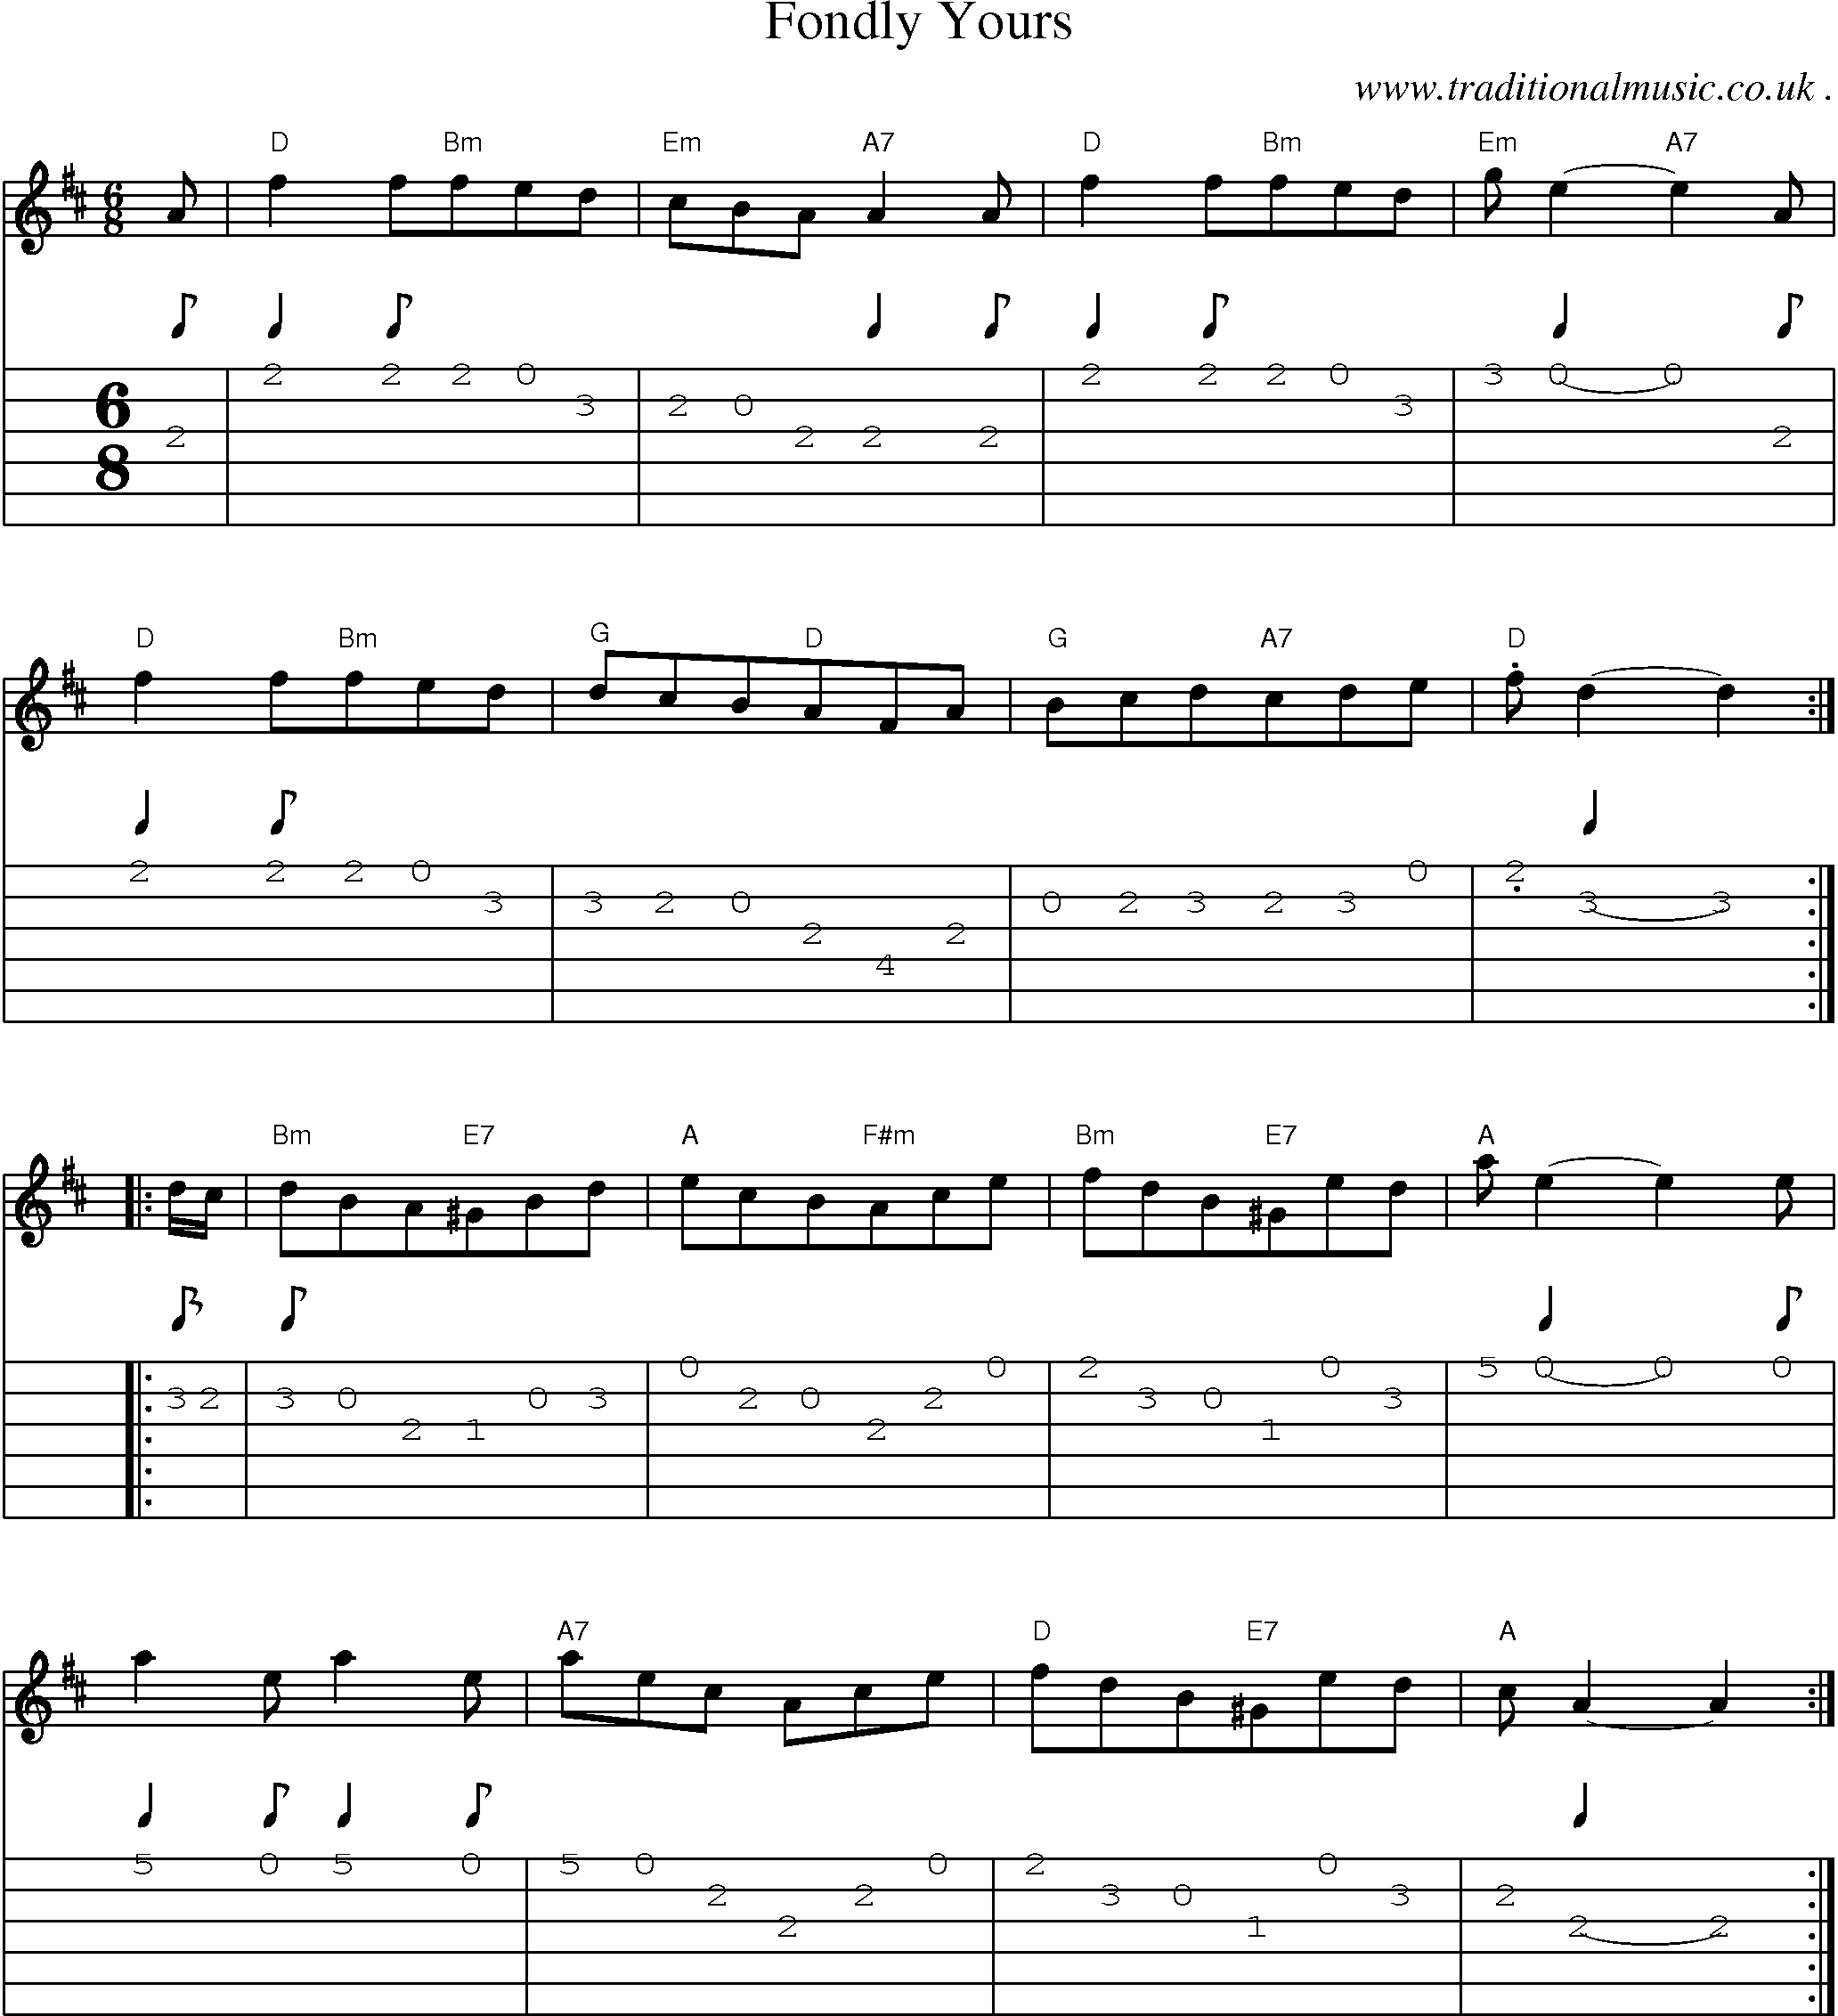 Sheet-Music and Guitar Tabs for Fondly Yours